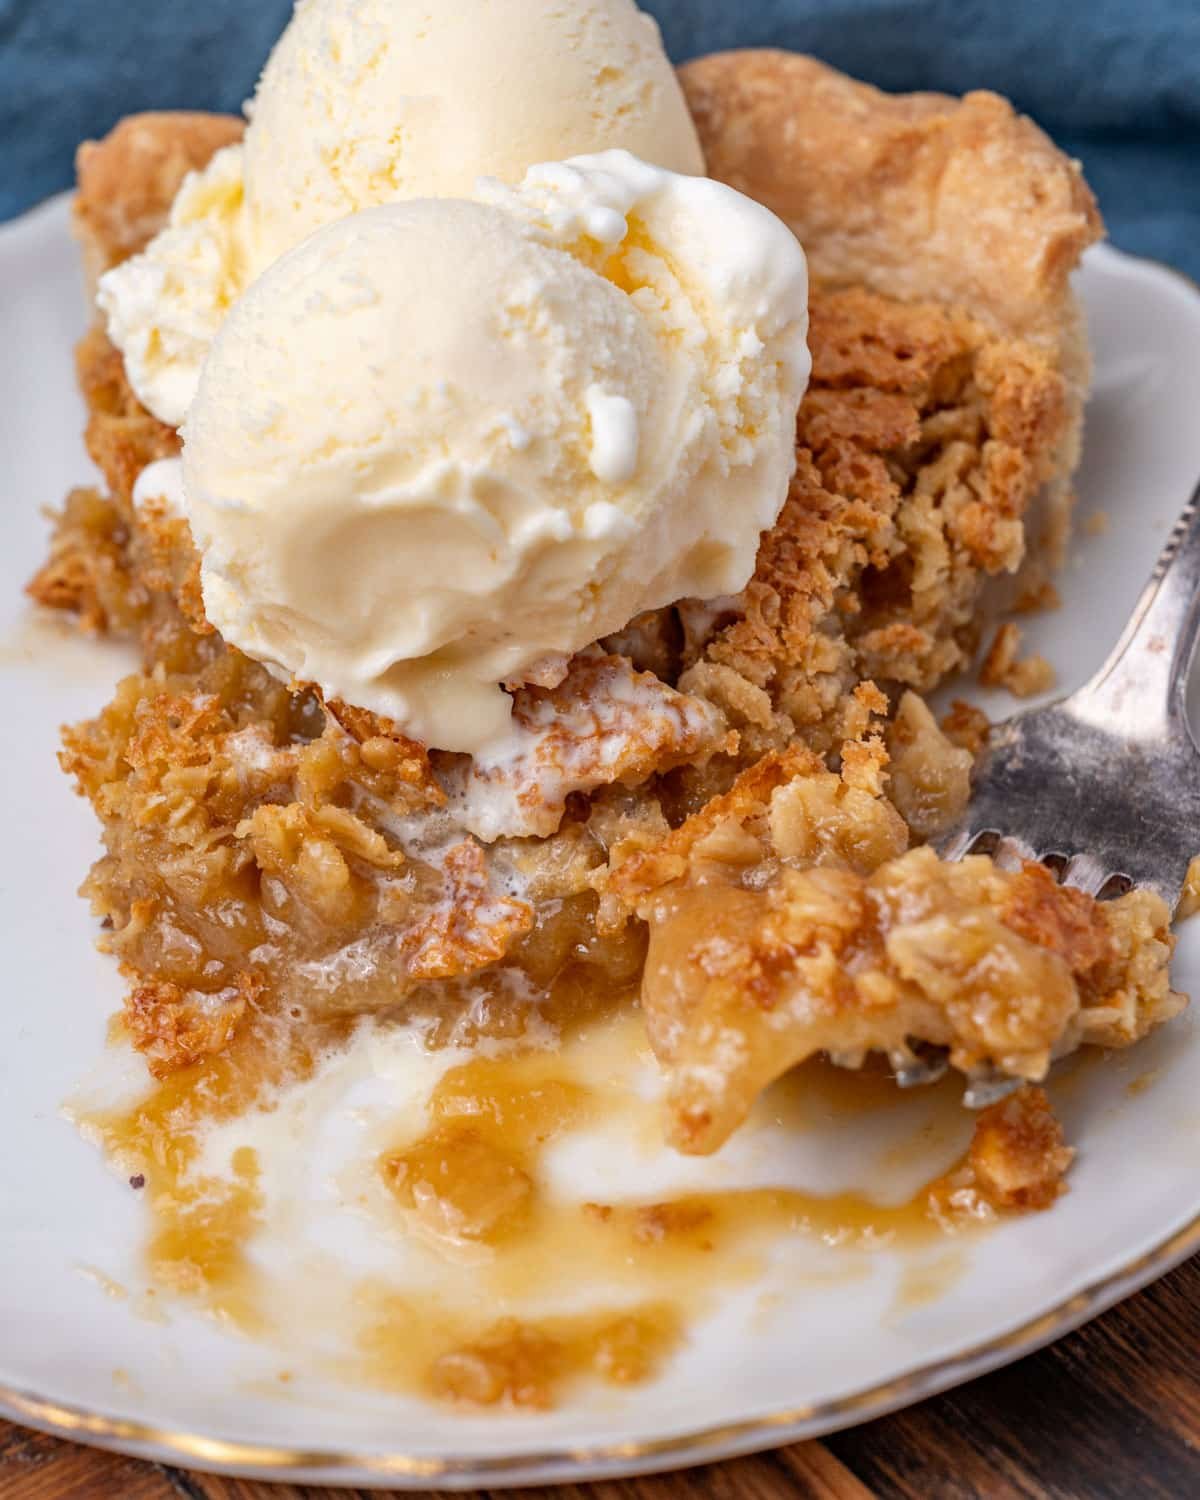 a piece of pie with ice cream and a bite on a fork